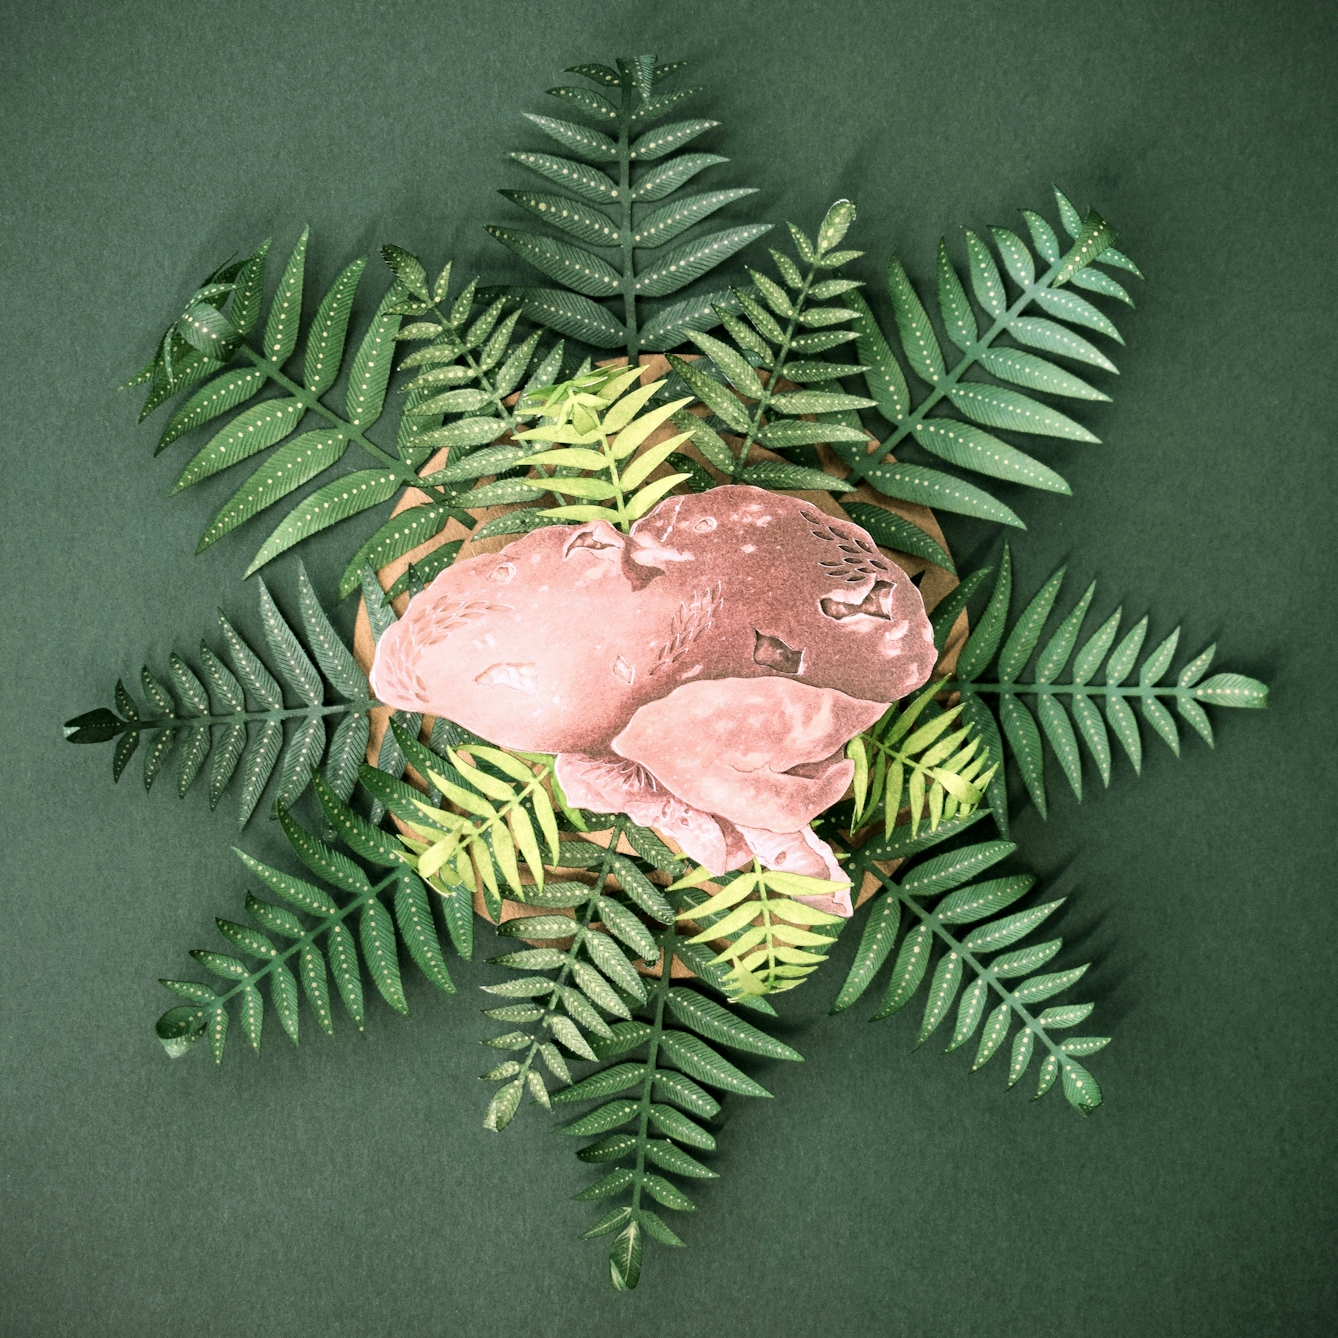 Colourful papercut artwork with many separate elements on different levels creating a scene with depth, perspective and shadows. The scene shows a green background on which a star shaped fern is growing, the green leaves extending out in all directions. In the centre of the fern is a pink tinted drawing of a human liver.